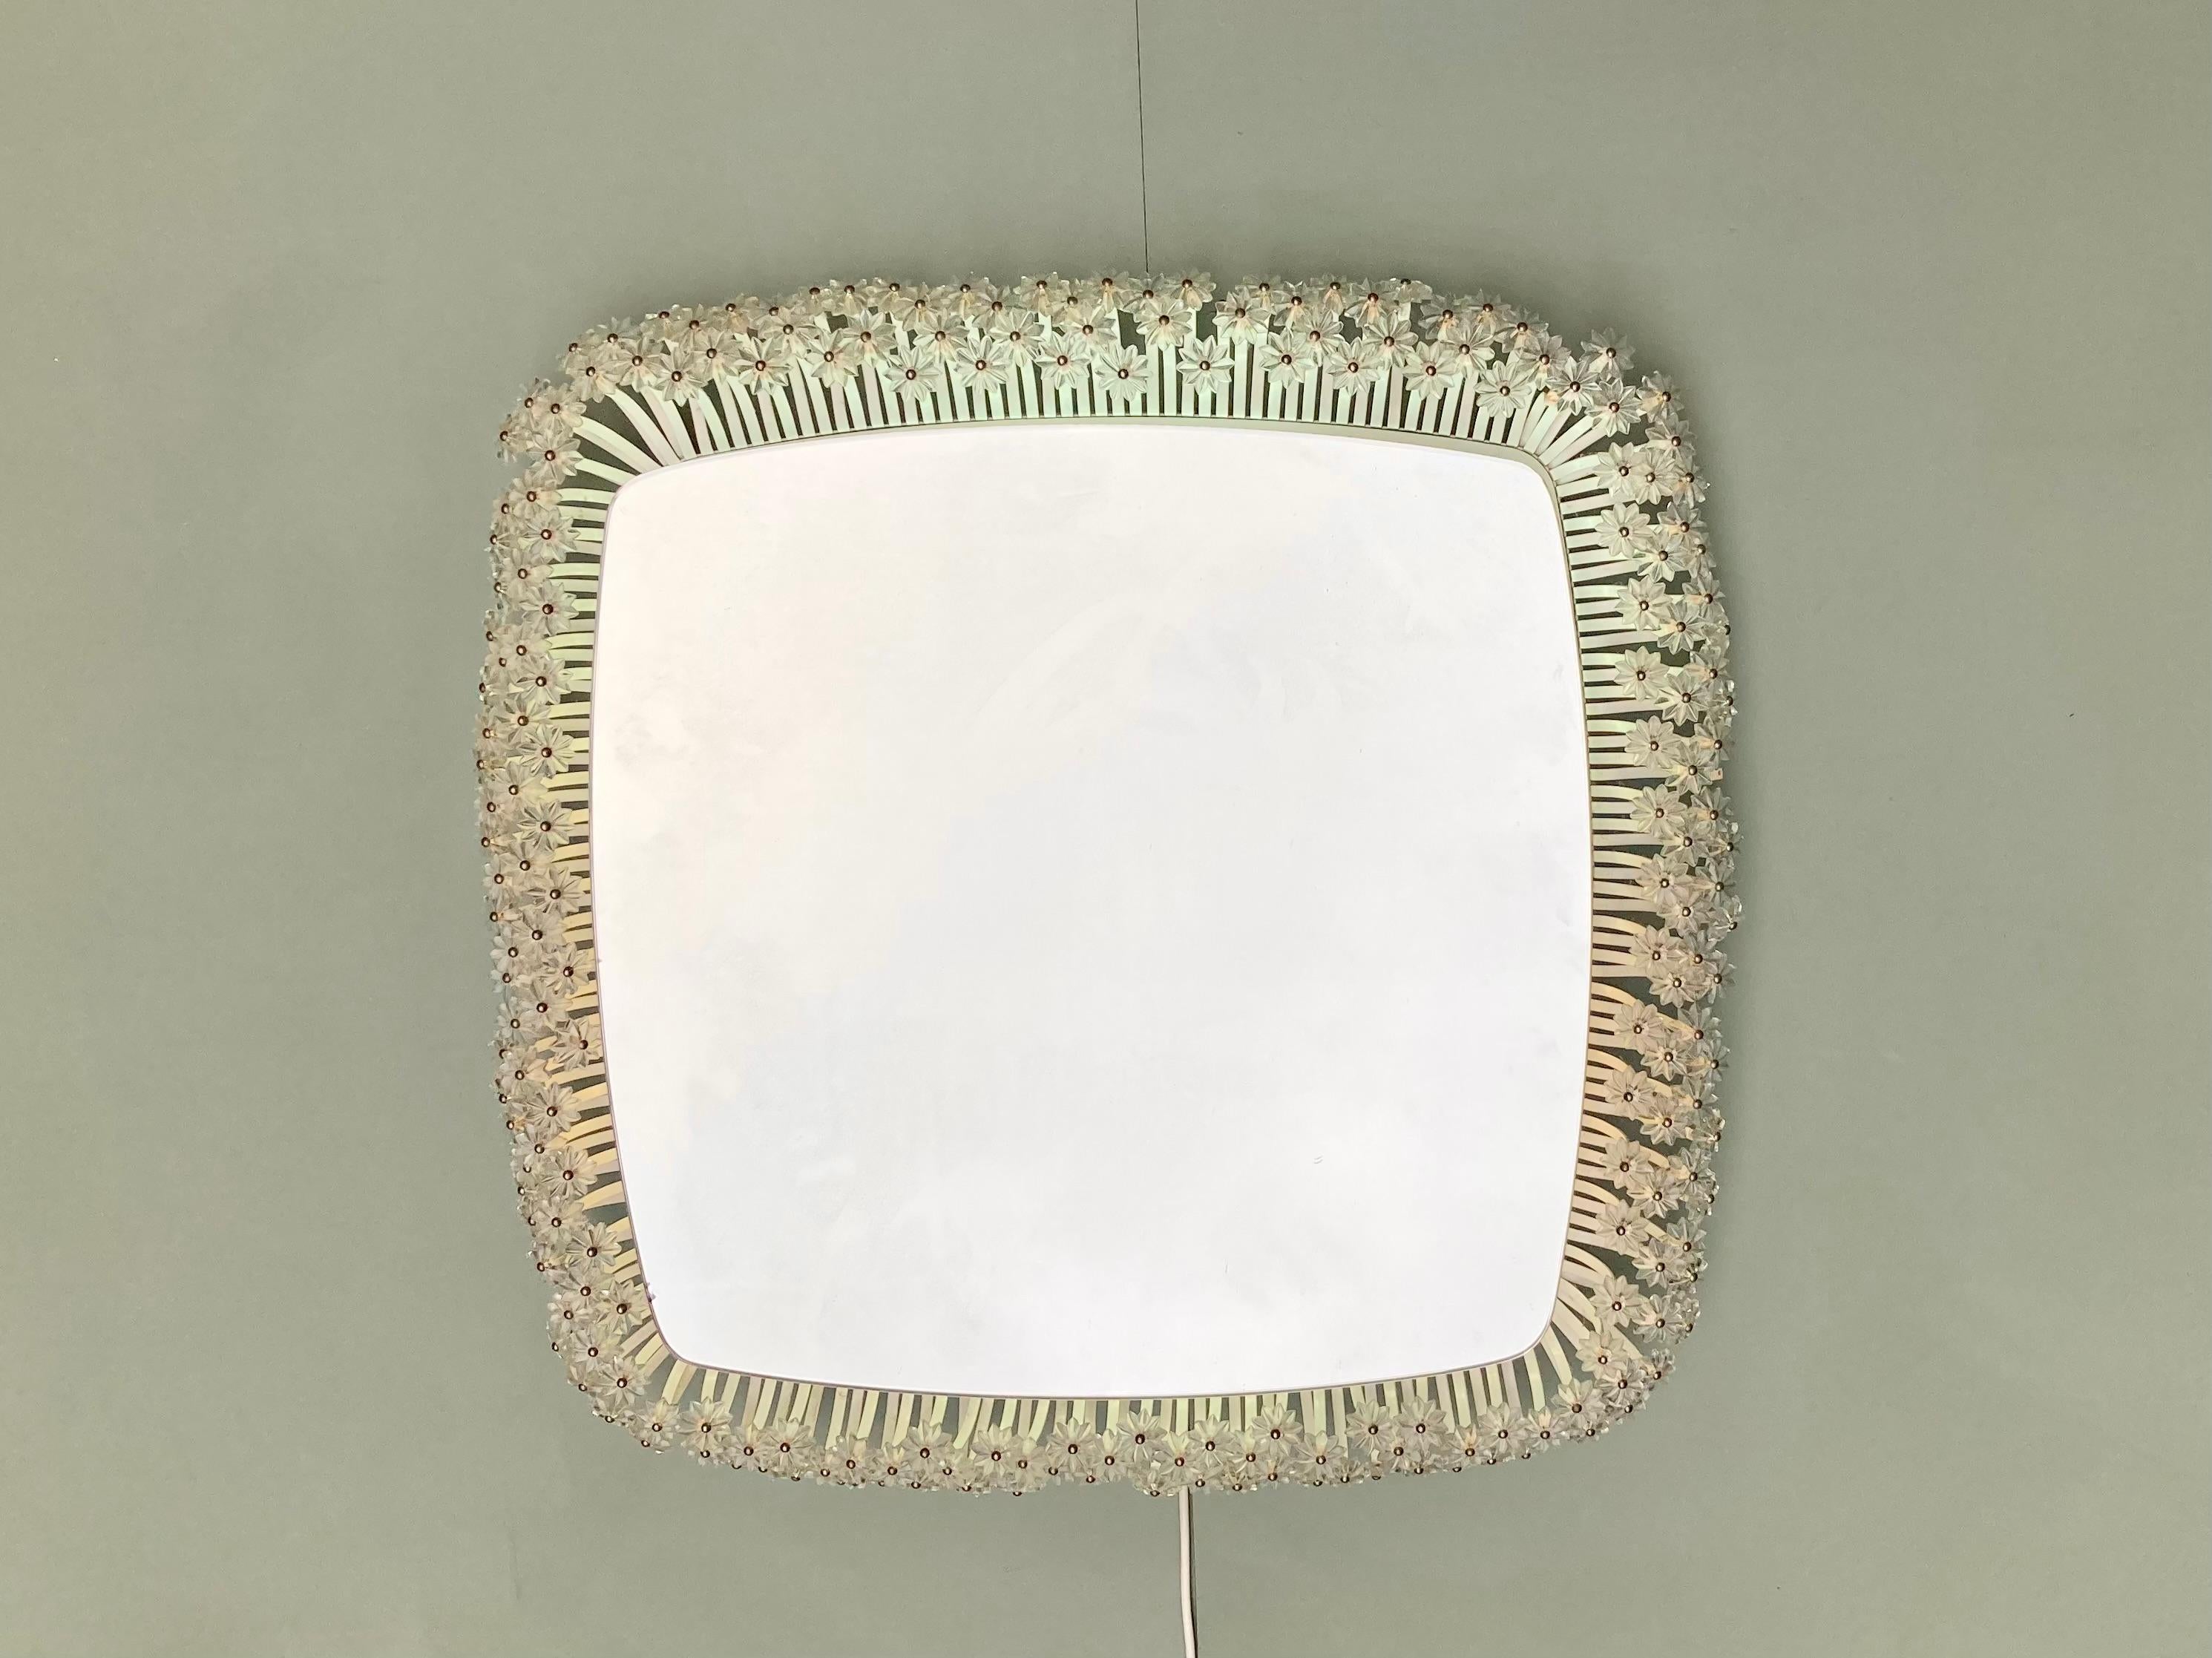 Backlit mirror by Emil Stejnar for Rupert Nikoll.
The frame of the mirror is in white lackered metal ending with glass flowers.
Light is functional, mirror is perfect.